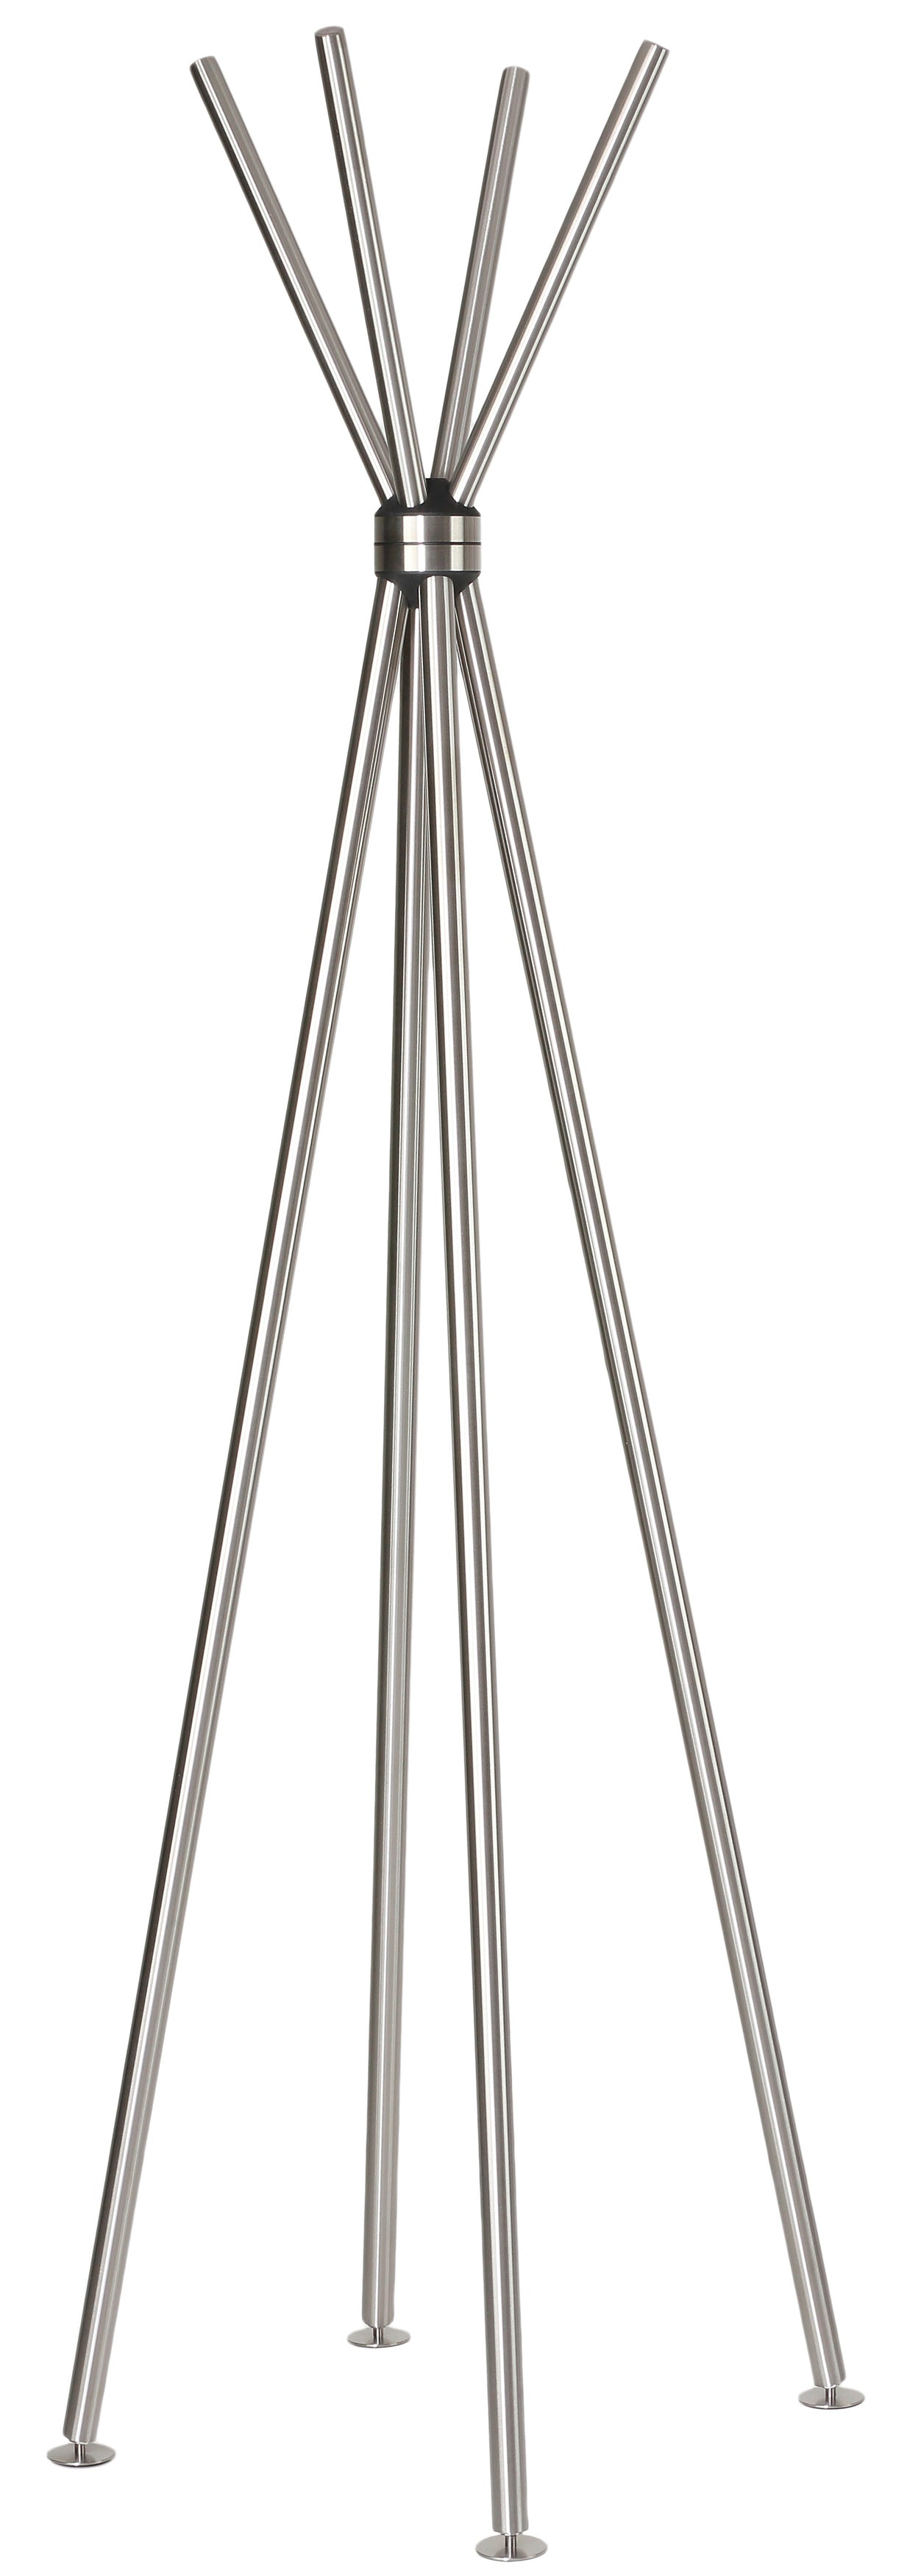 Cortesi Home Deacon Contemporary Stainless Steel Coat Rack, Brushed Nickel